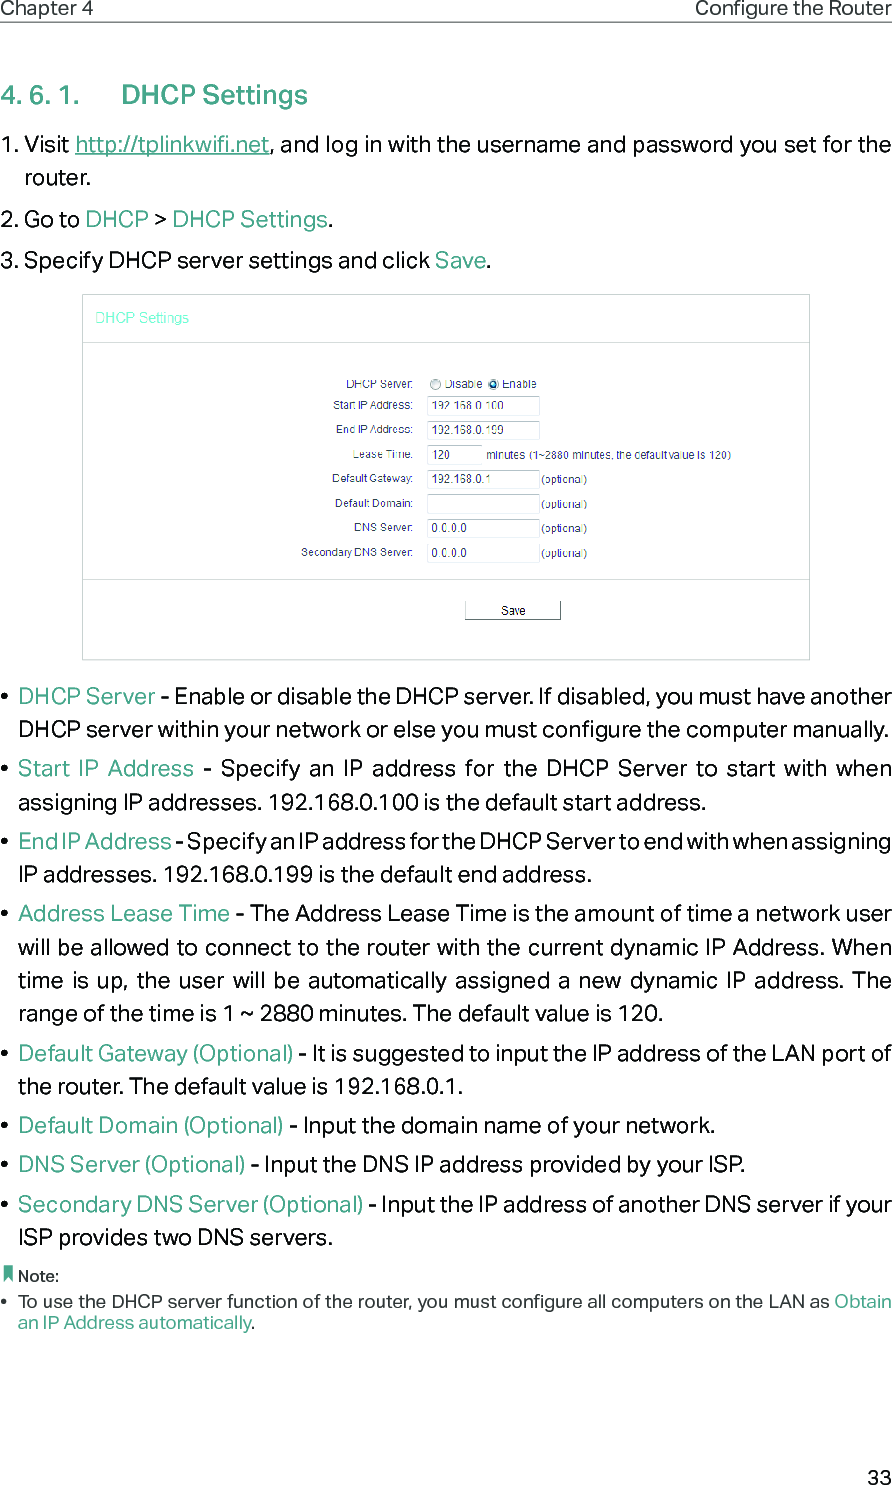 33Chapter 4 Congure the Router 4. 6. 1.  DHCP Settings1. Visit http://tplinkwifi.net, and log in with the username and password you set for the router.2. Go to DHCP &gt; DHCP Settings. 3. Specify DHCP server settings and click Save.•  DHCP Server - Enable or disable the DHCP server. If disabled, you must have another DHCP server within your network or else you must configure the computer manually.•  Start IP Address - Specify an IP address for the DHCP Server to start with when assigning IP addresses. 192.168.0.100 is the default start address.•  End IP Address - Specify an IP address for the DHCP Server to end with when assigning IP addresses. 192.168.0.199 is the default end address.•  Address Lease Time - The Address Lease Time is the amount of time a network user will be allowed to connect to the router with the current dynamic IP Address. When time is up, the user will be automatically assigned a new dynamic IP address. The range of the time is 1 ~ 2880 minutes. The default value is 120.•  Default Gateway (Optional) - It is suggested to input the IP address of the LAN port of the router. The default value is 192.168.0.1.•  Default Domain (Optional) - Input the domain name of your network.•  DNS Server (Optional) - Input the DNS IP address provided by your ISP.•  Secondary DNS Server (Optional) - Input the IP address of another DNS server if your ISP provides two DNS servers. Note:•  To use the DHCP server function of the router, you must configure all computers on the LAN as Obtain an IP Address automatically.